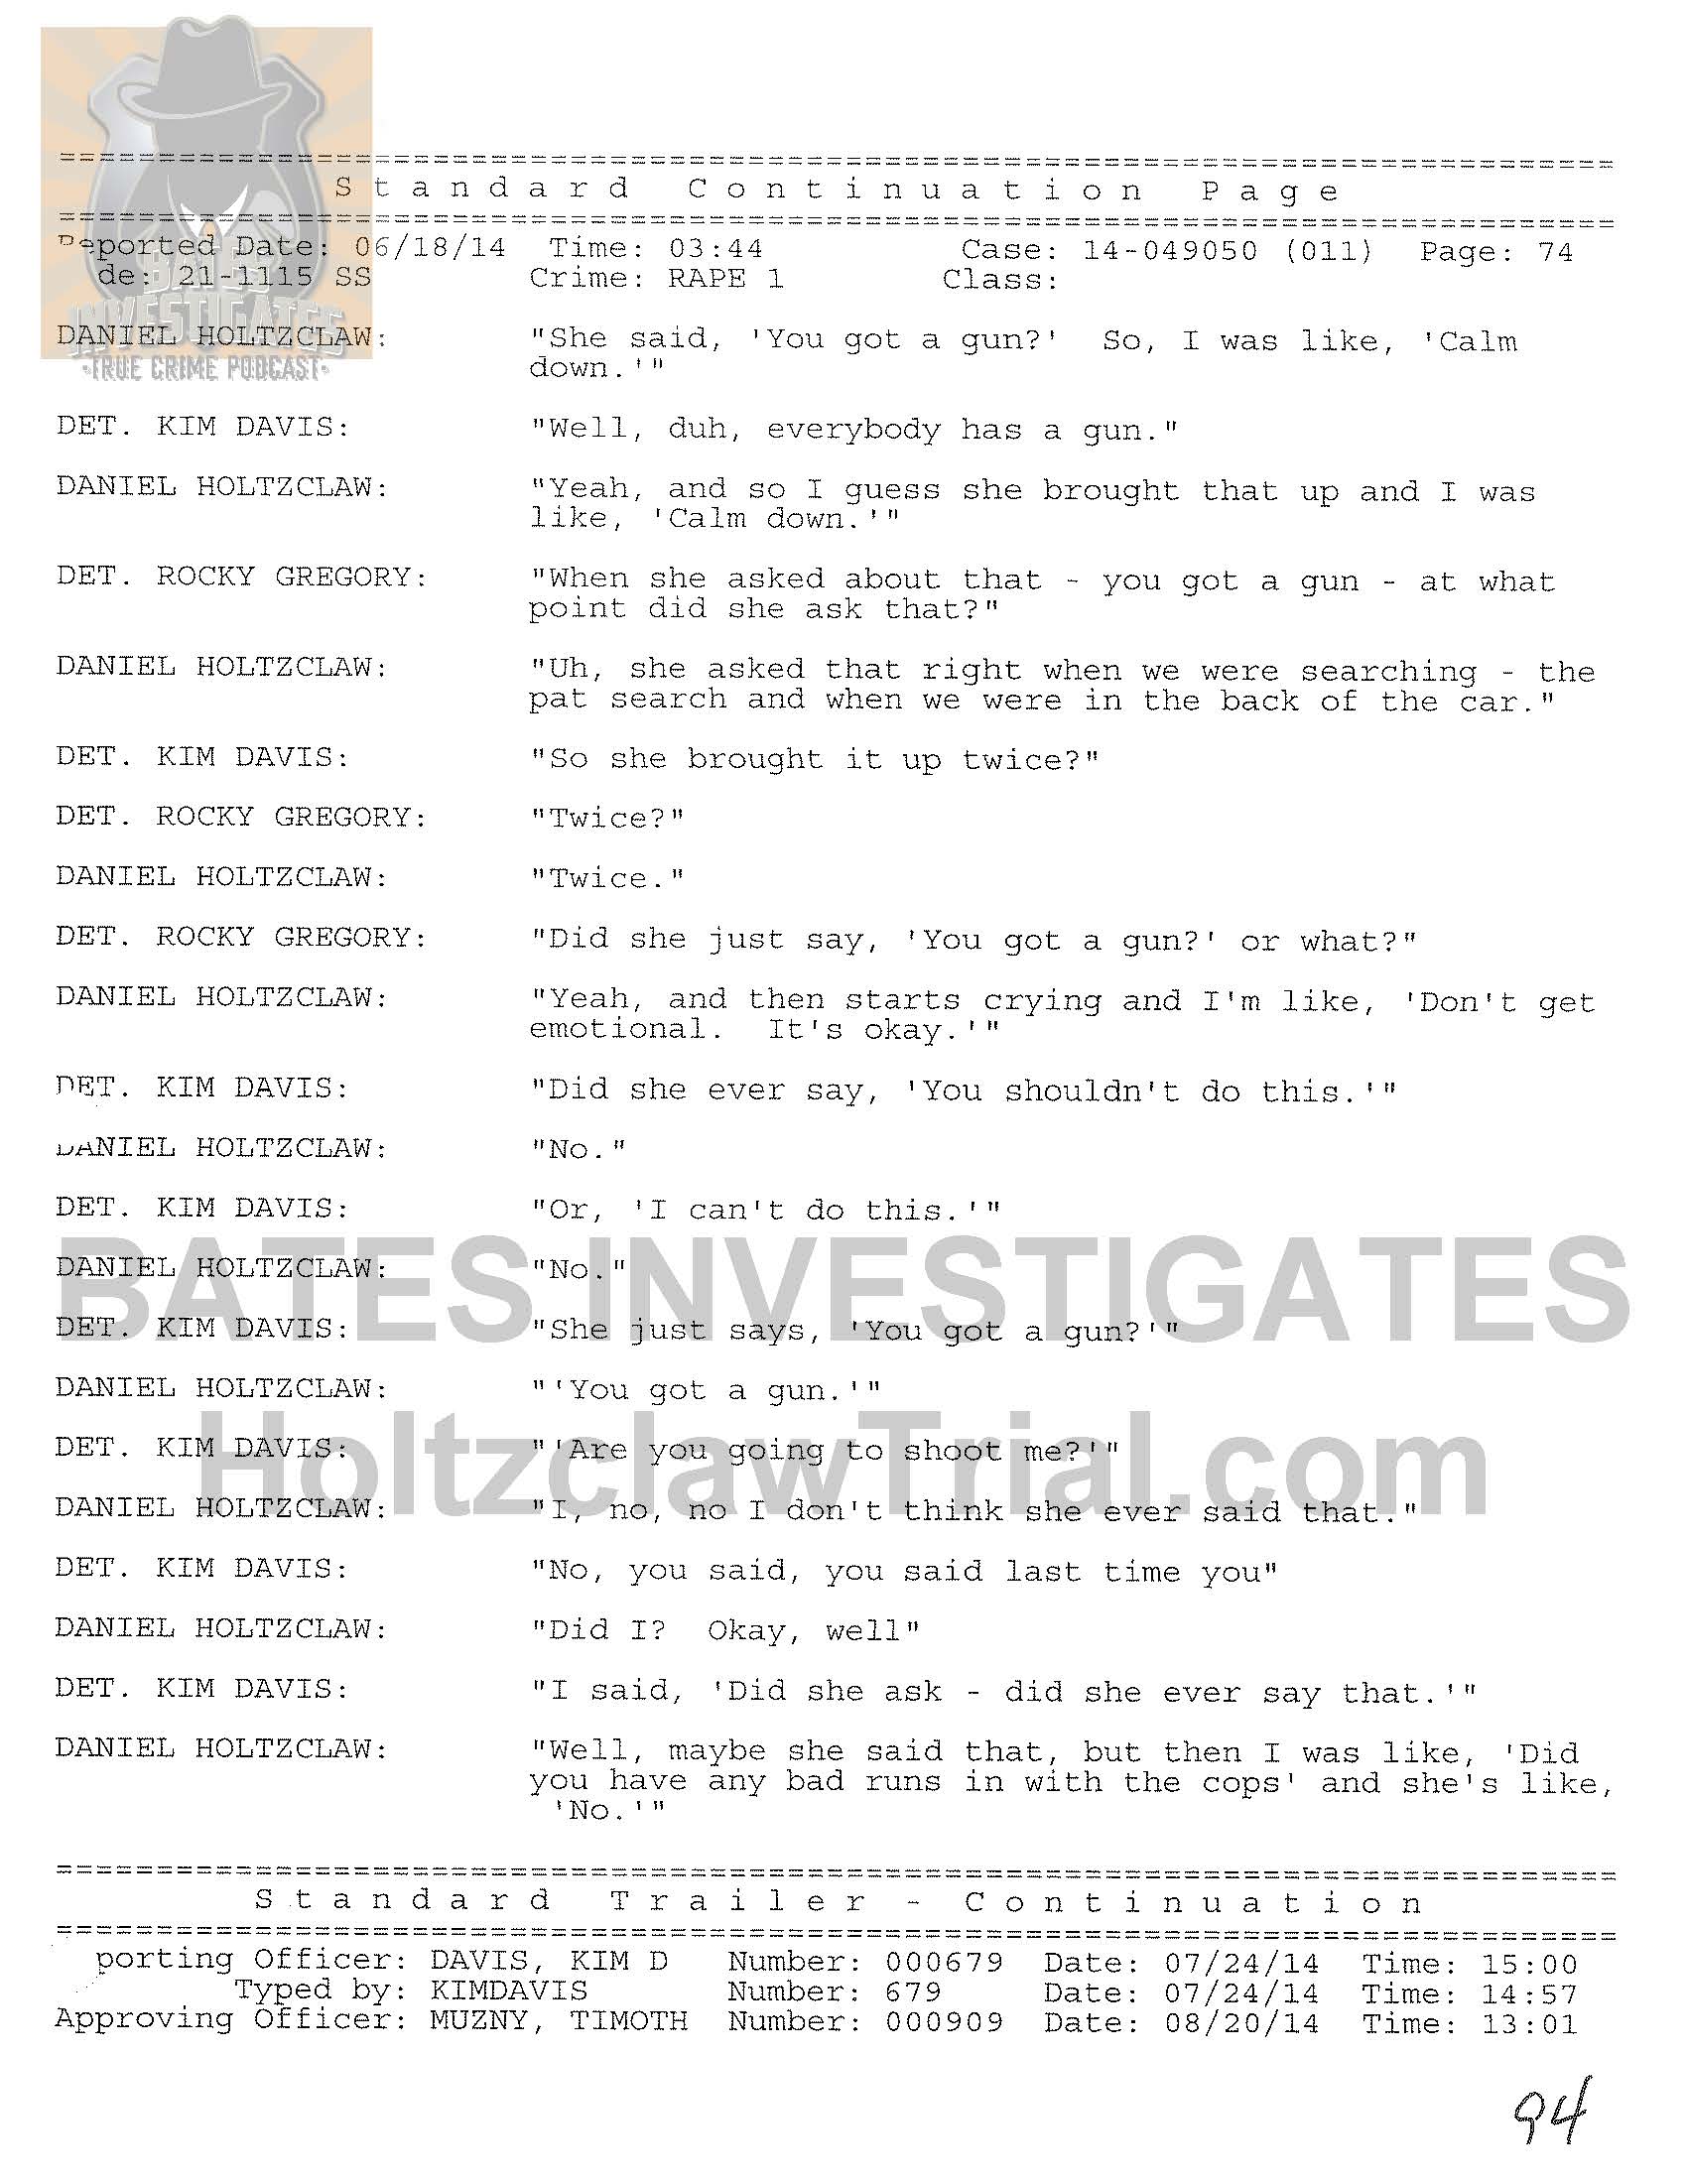 Holtzclaw Interrogation Transcript - Ep02 Redacted_Page_74.jpg